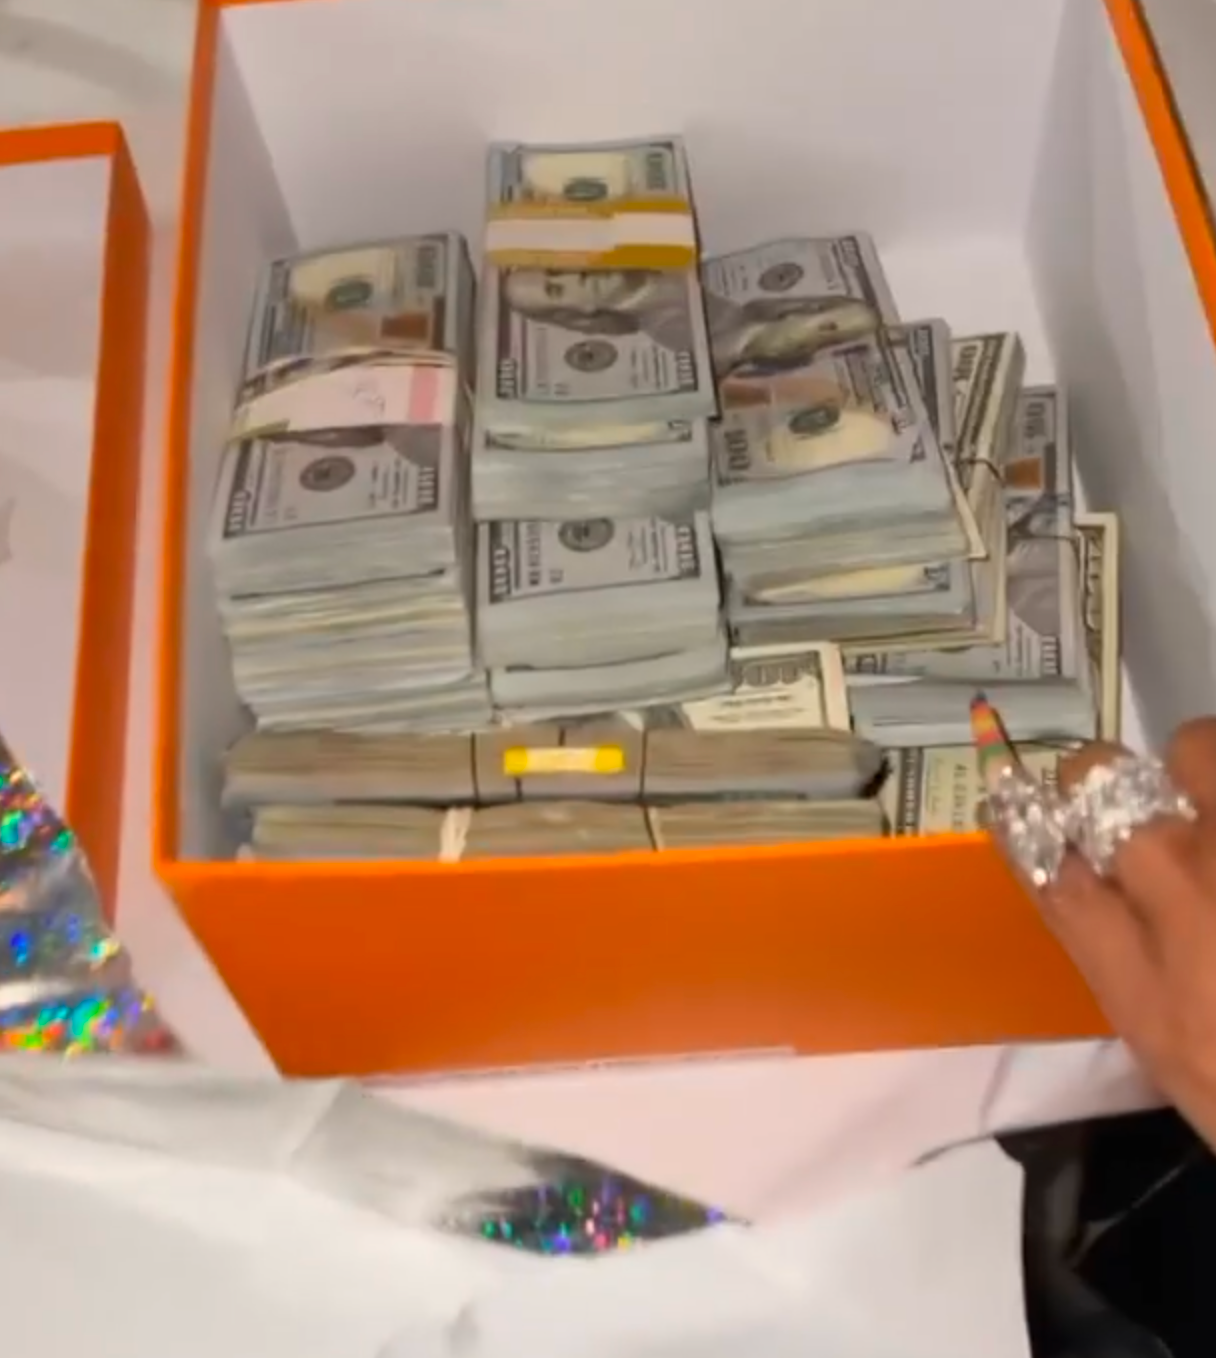 Rapper Gucci Mane Gifts Wife $1 MILLION In Cash For Her 37th Birthday!